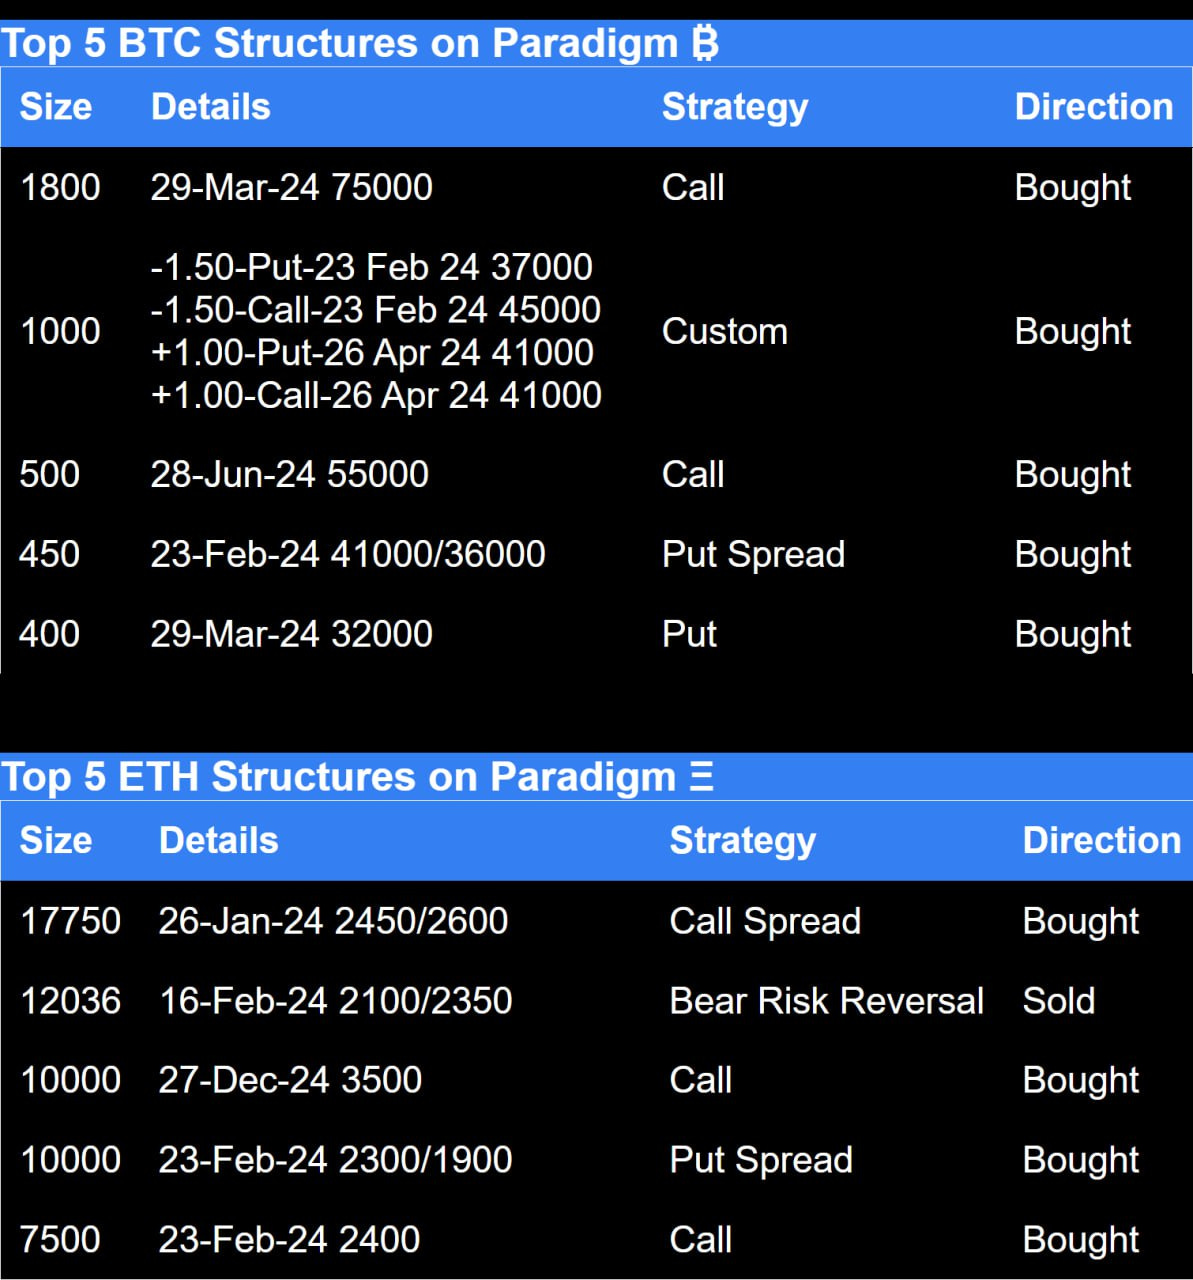 Top 5 BTC and ETH structures on paradigm call spread, bear risk reversal, call, put spread, and puts